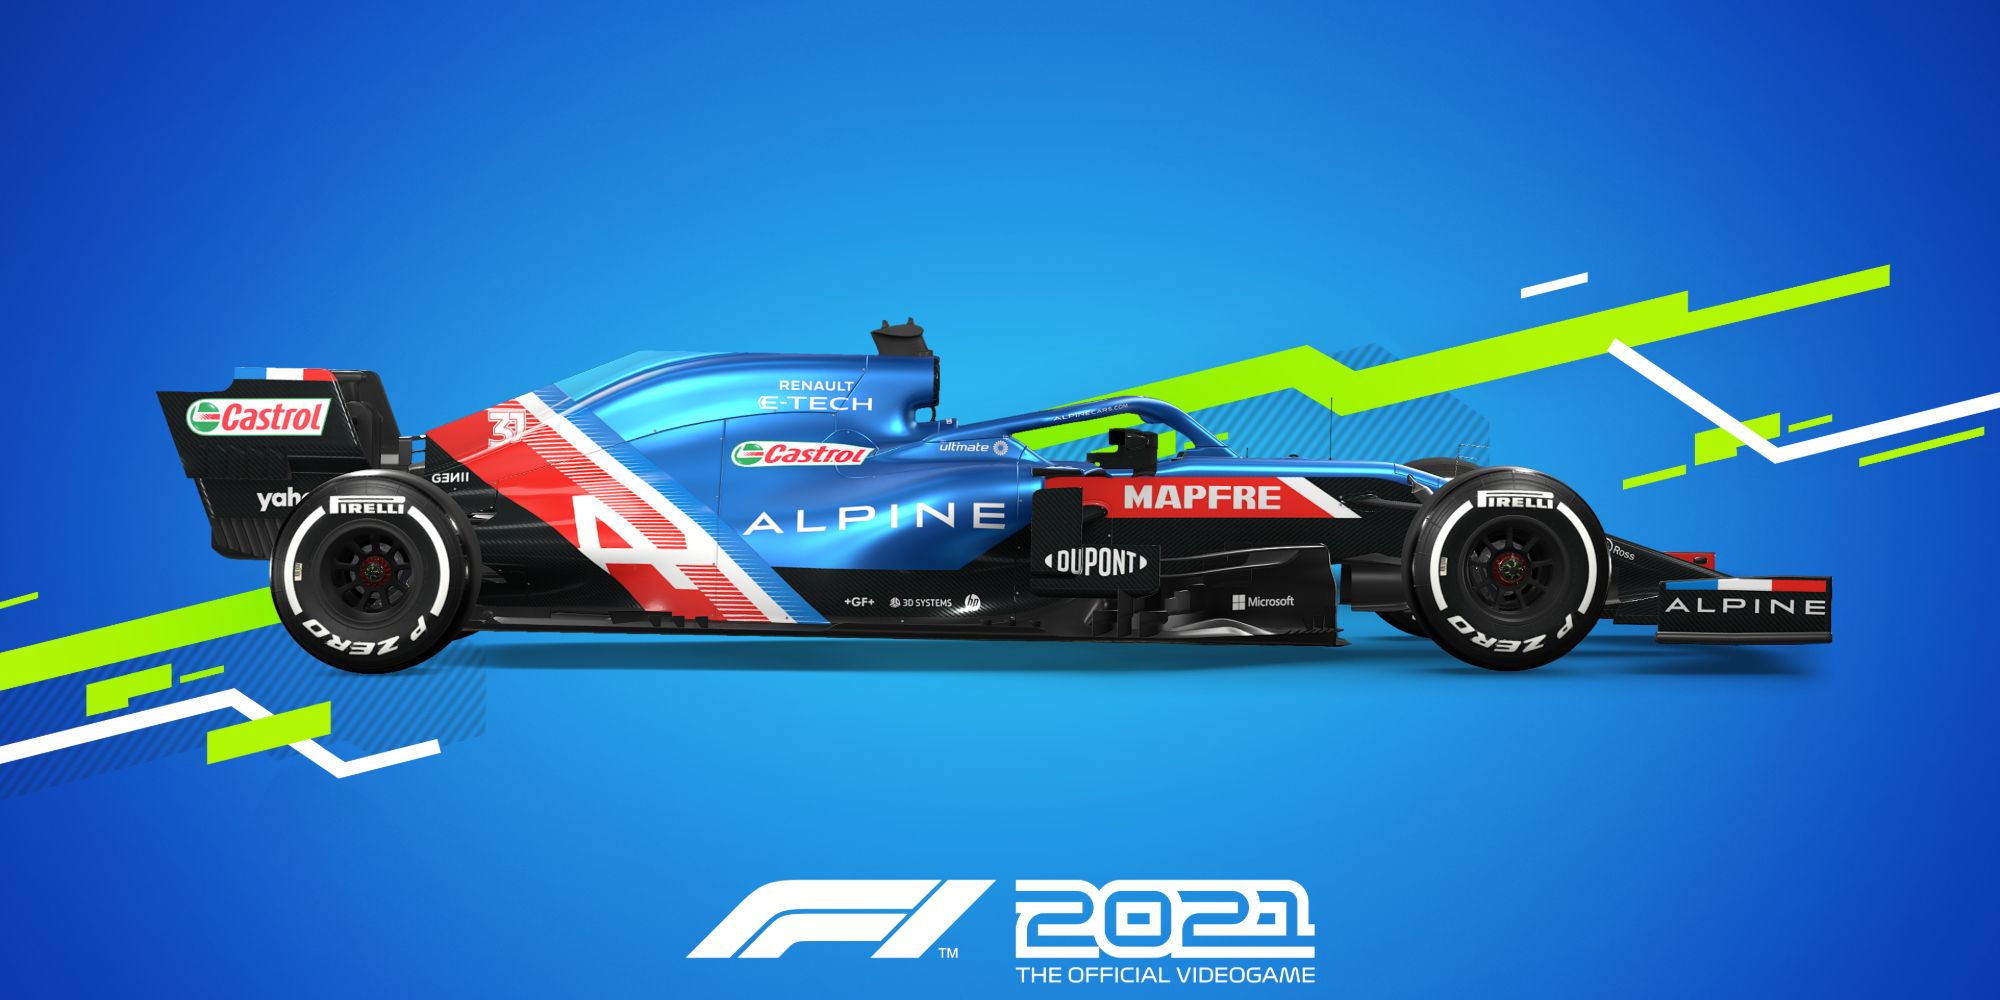 a shot of the formula 1 car Alpine against a blue background with green streaks running through it and the game's logo beneath it